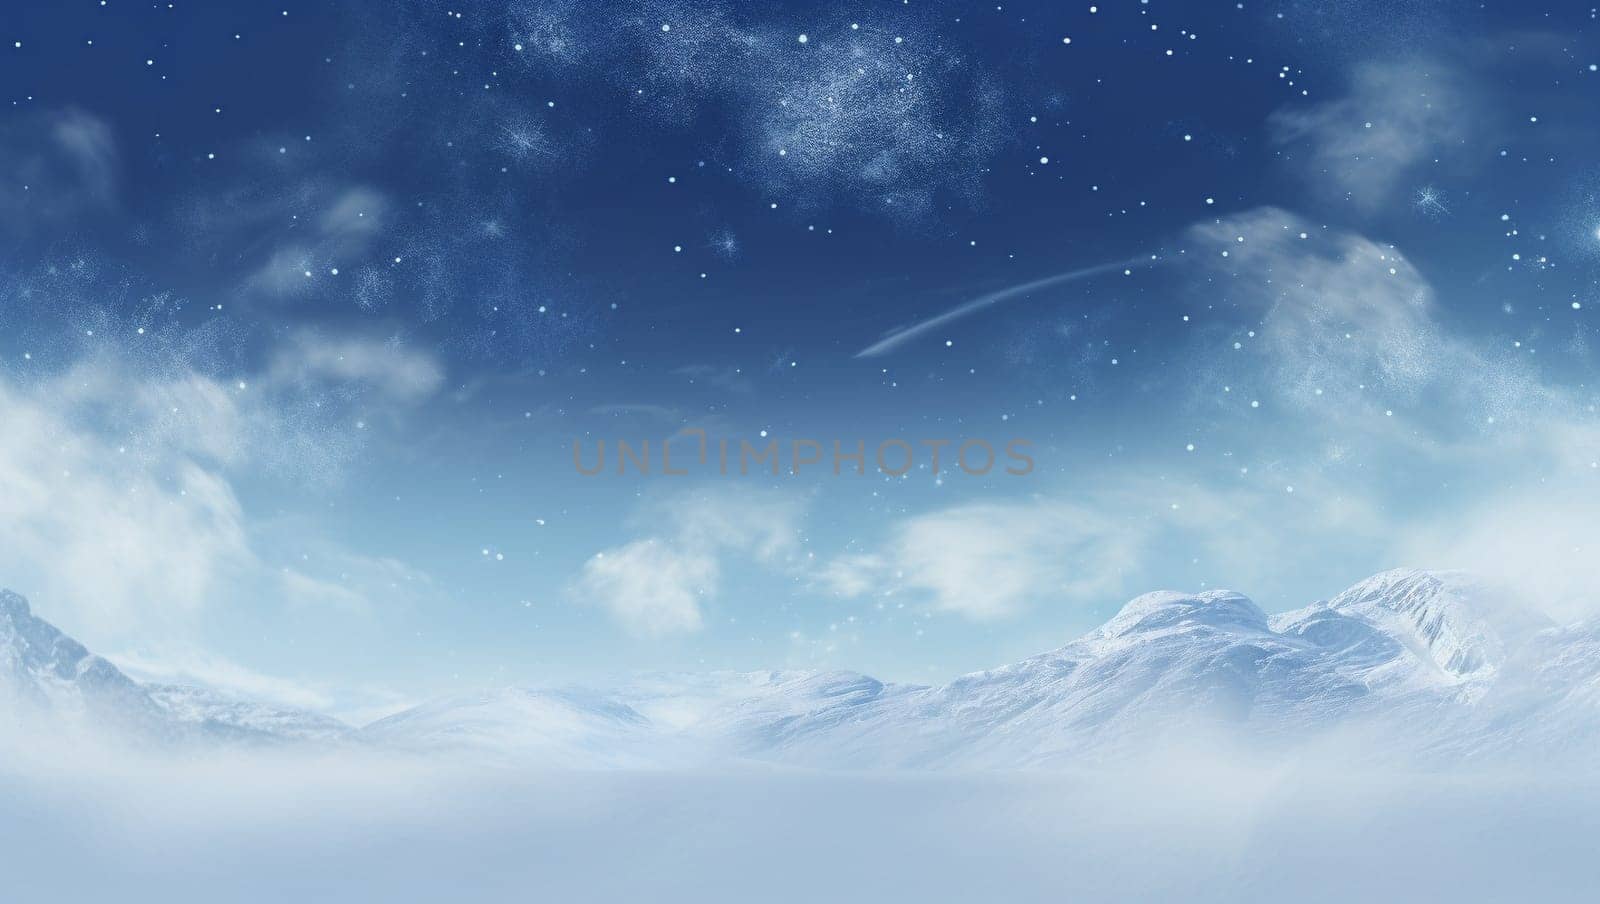 Snowy background. New Year's mood, christmas snowy background. Blue and white shimmer. Snowy hills and sky. by Sneznyj